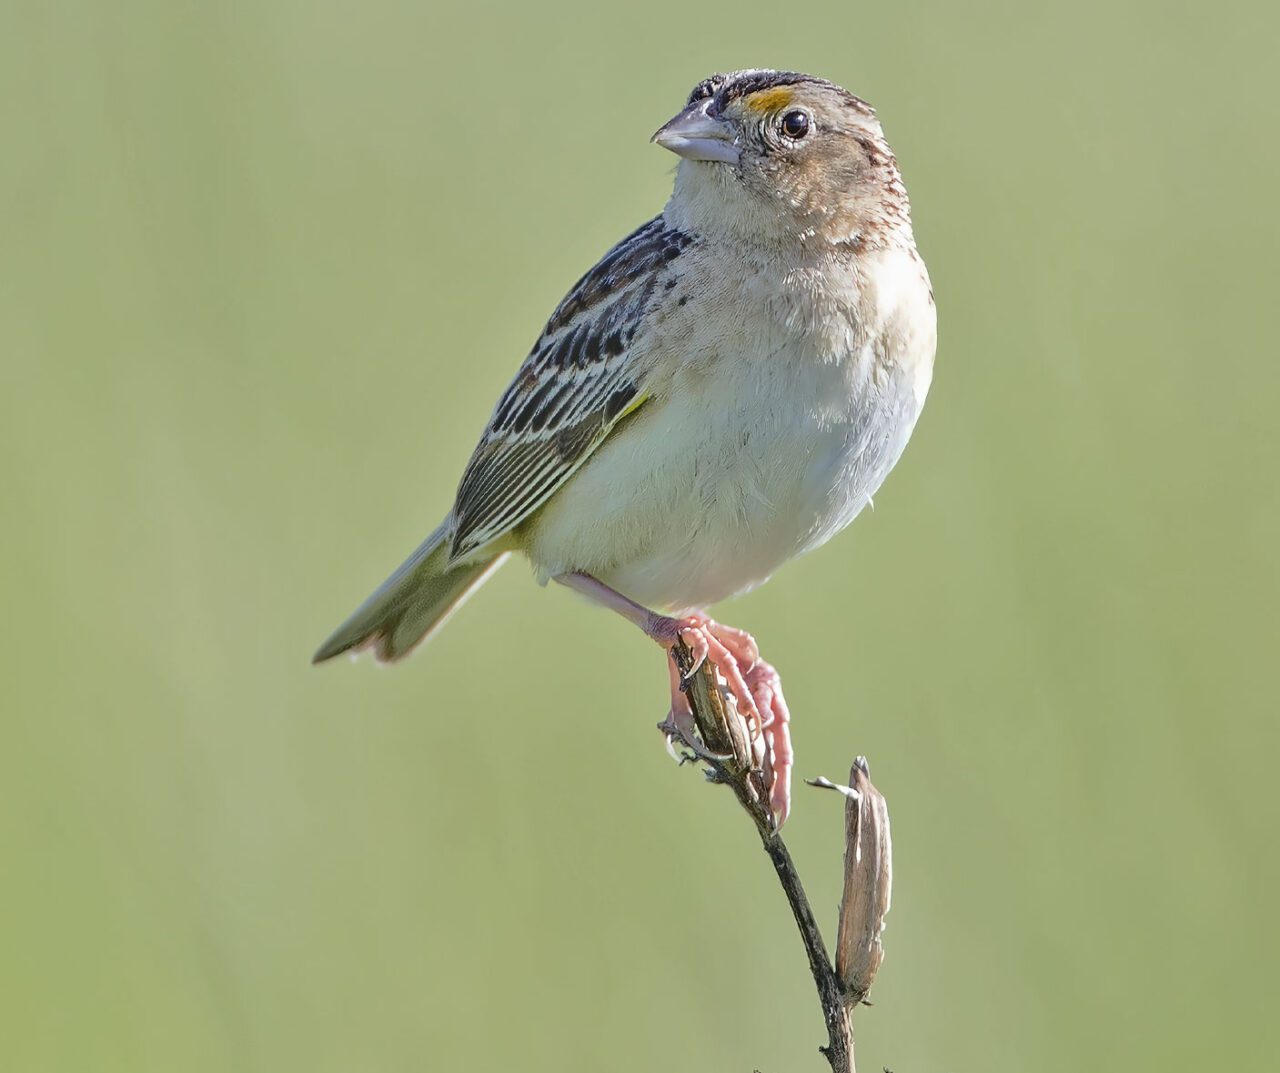 slightly chubby bird with cream breast, brown and cream wings, a conical bill with yellow eyebrow, perches on a grass stem.